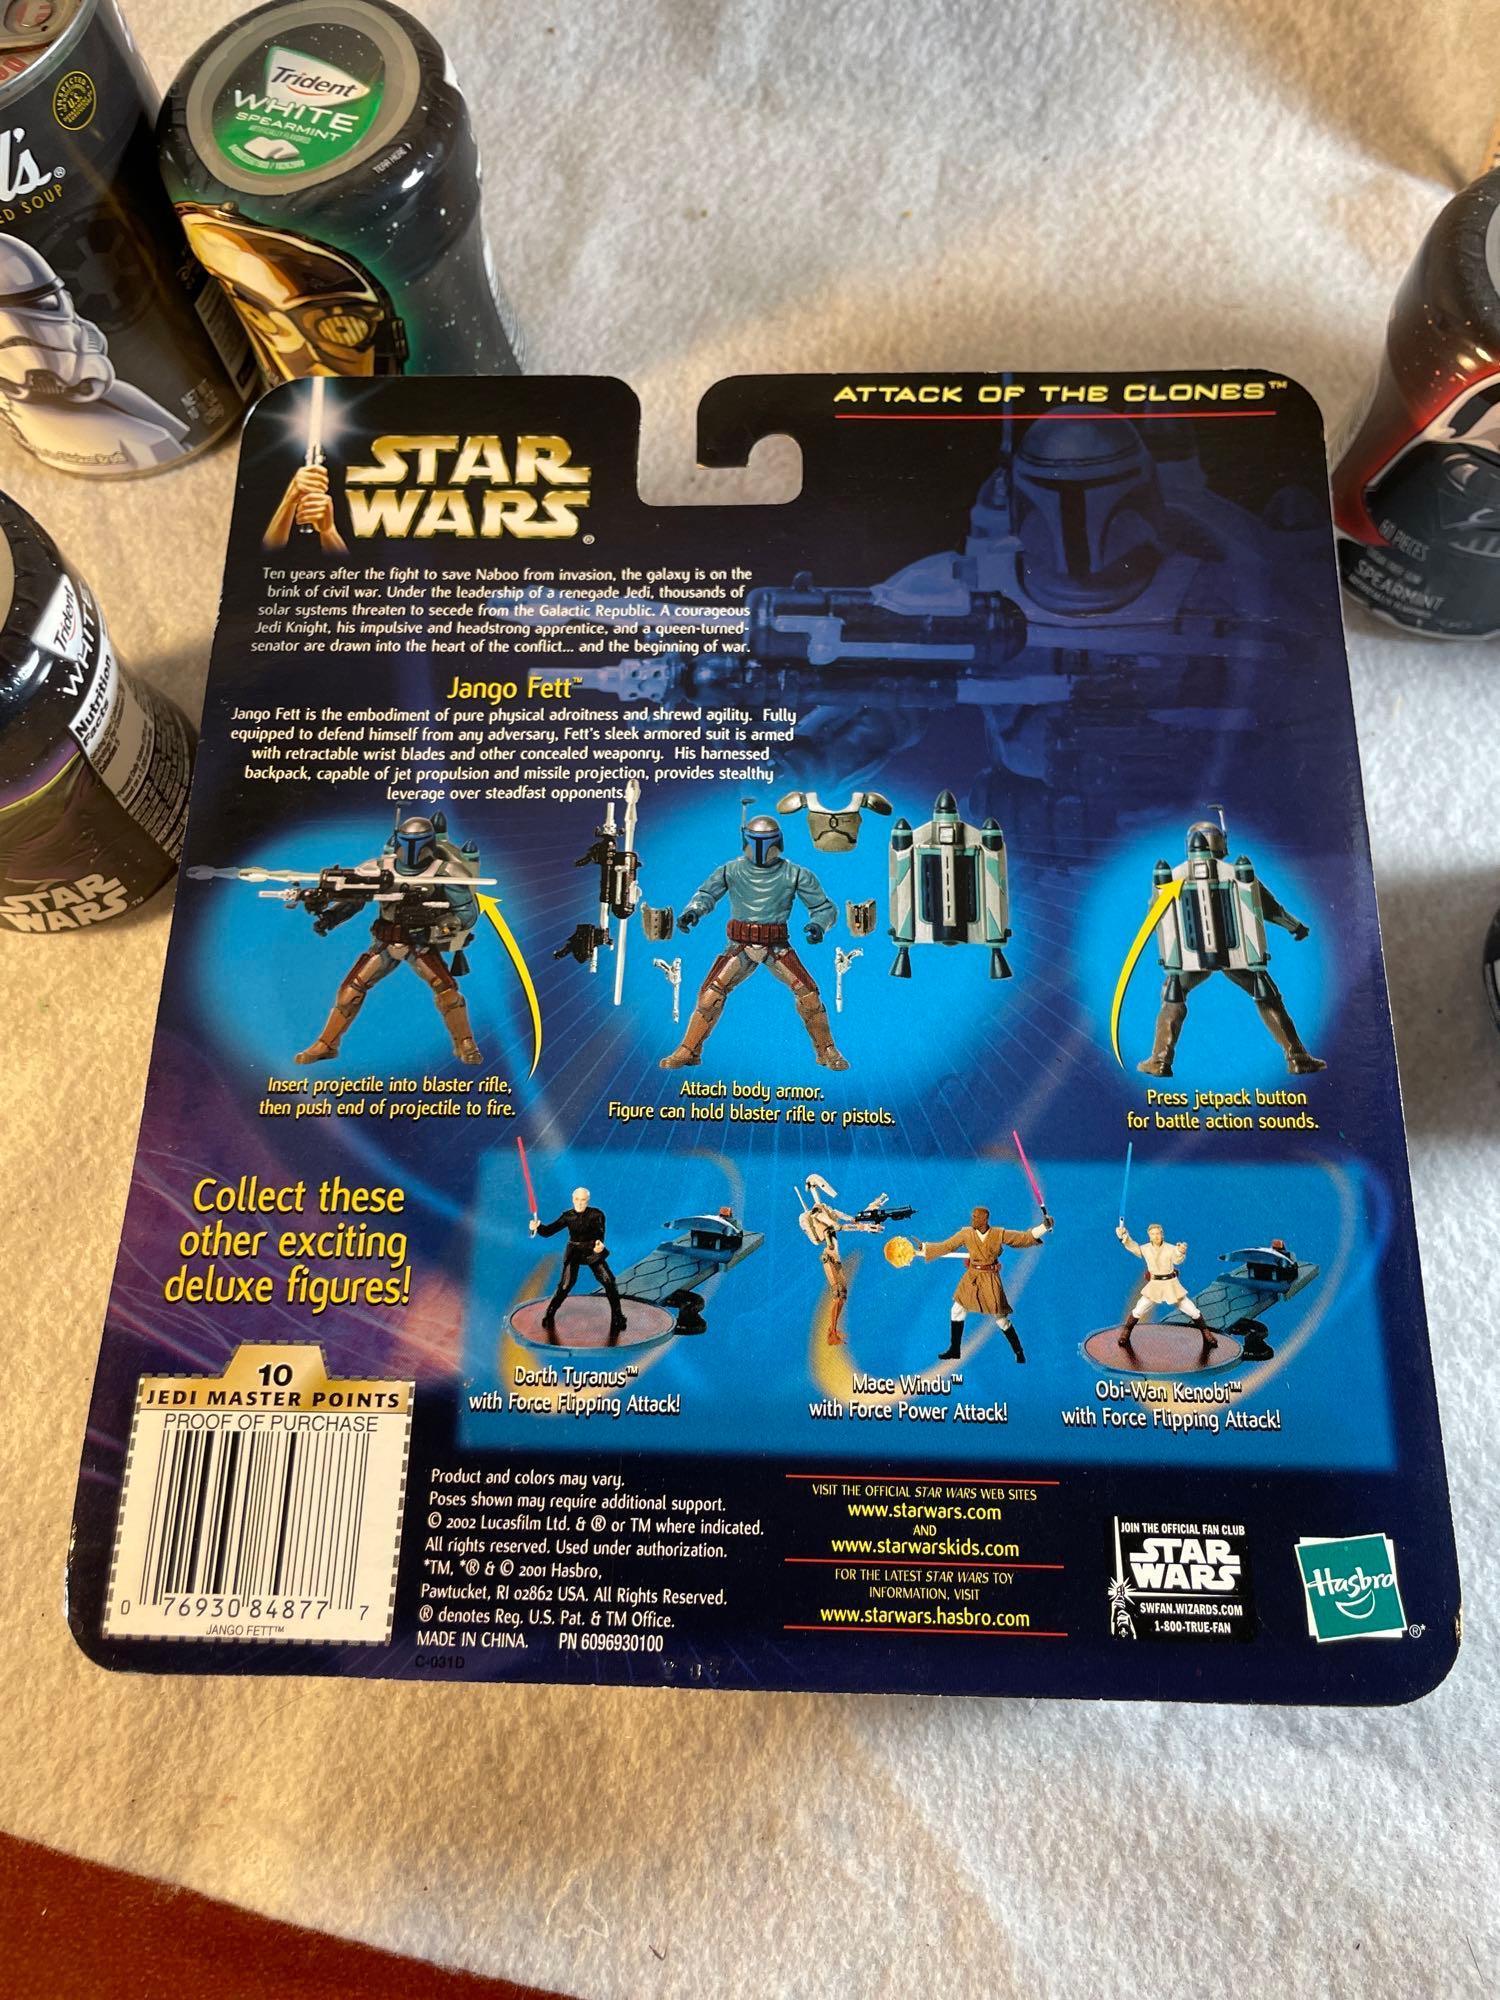 Star Wars BoBa Fett Action Figure NIB and Misc Star Wars Collectibles